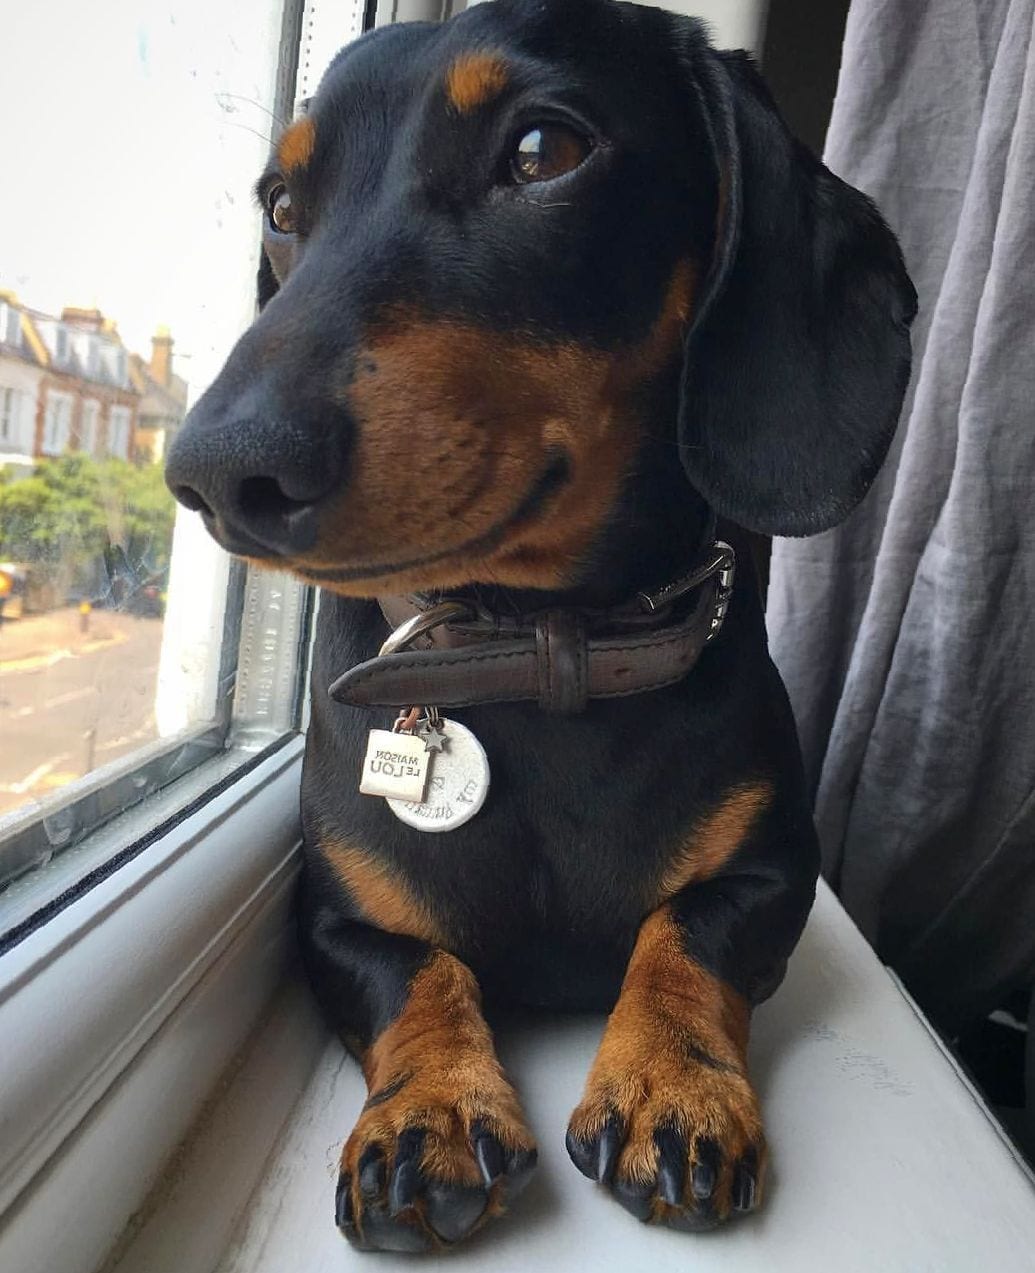 A Dachshund lying by the window sill while looking outside